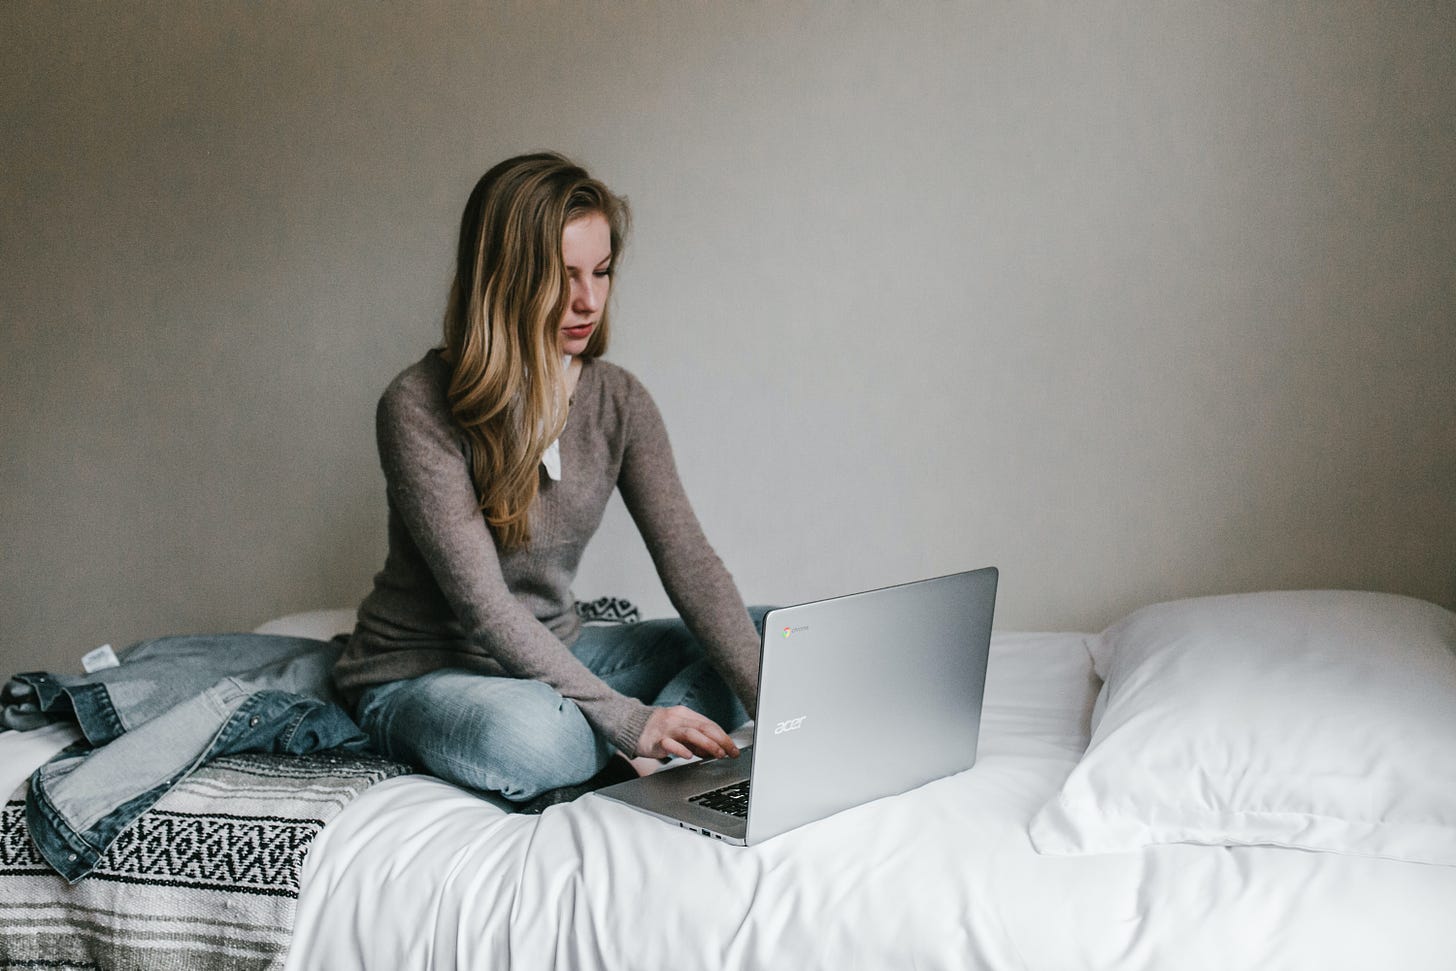 A woman types at a laptop sitting on a bed